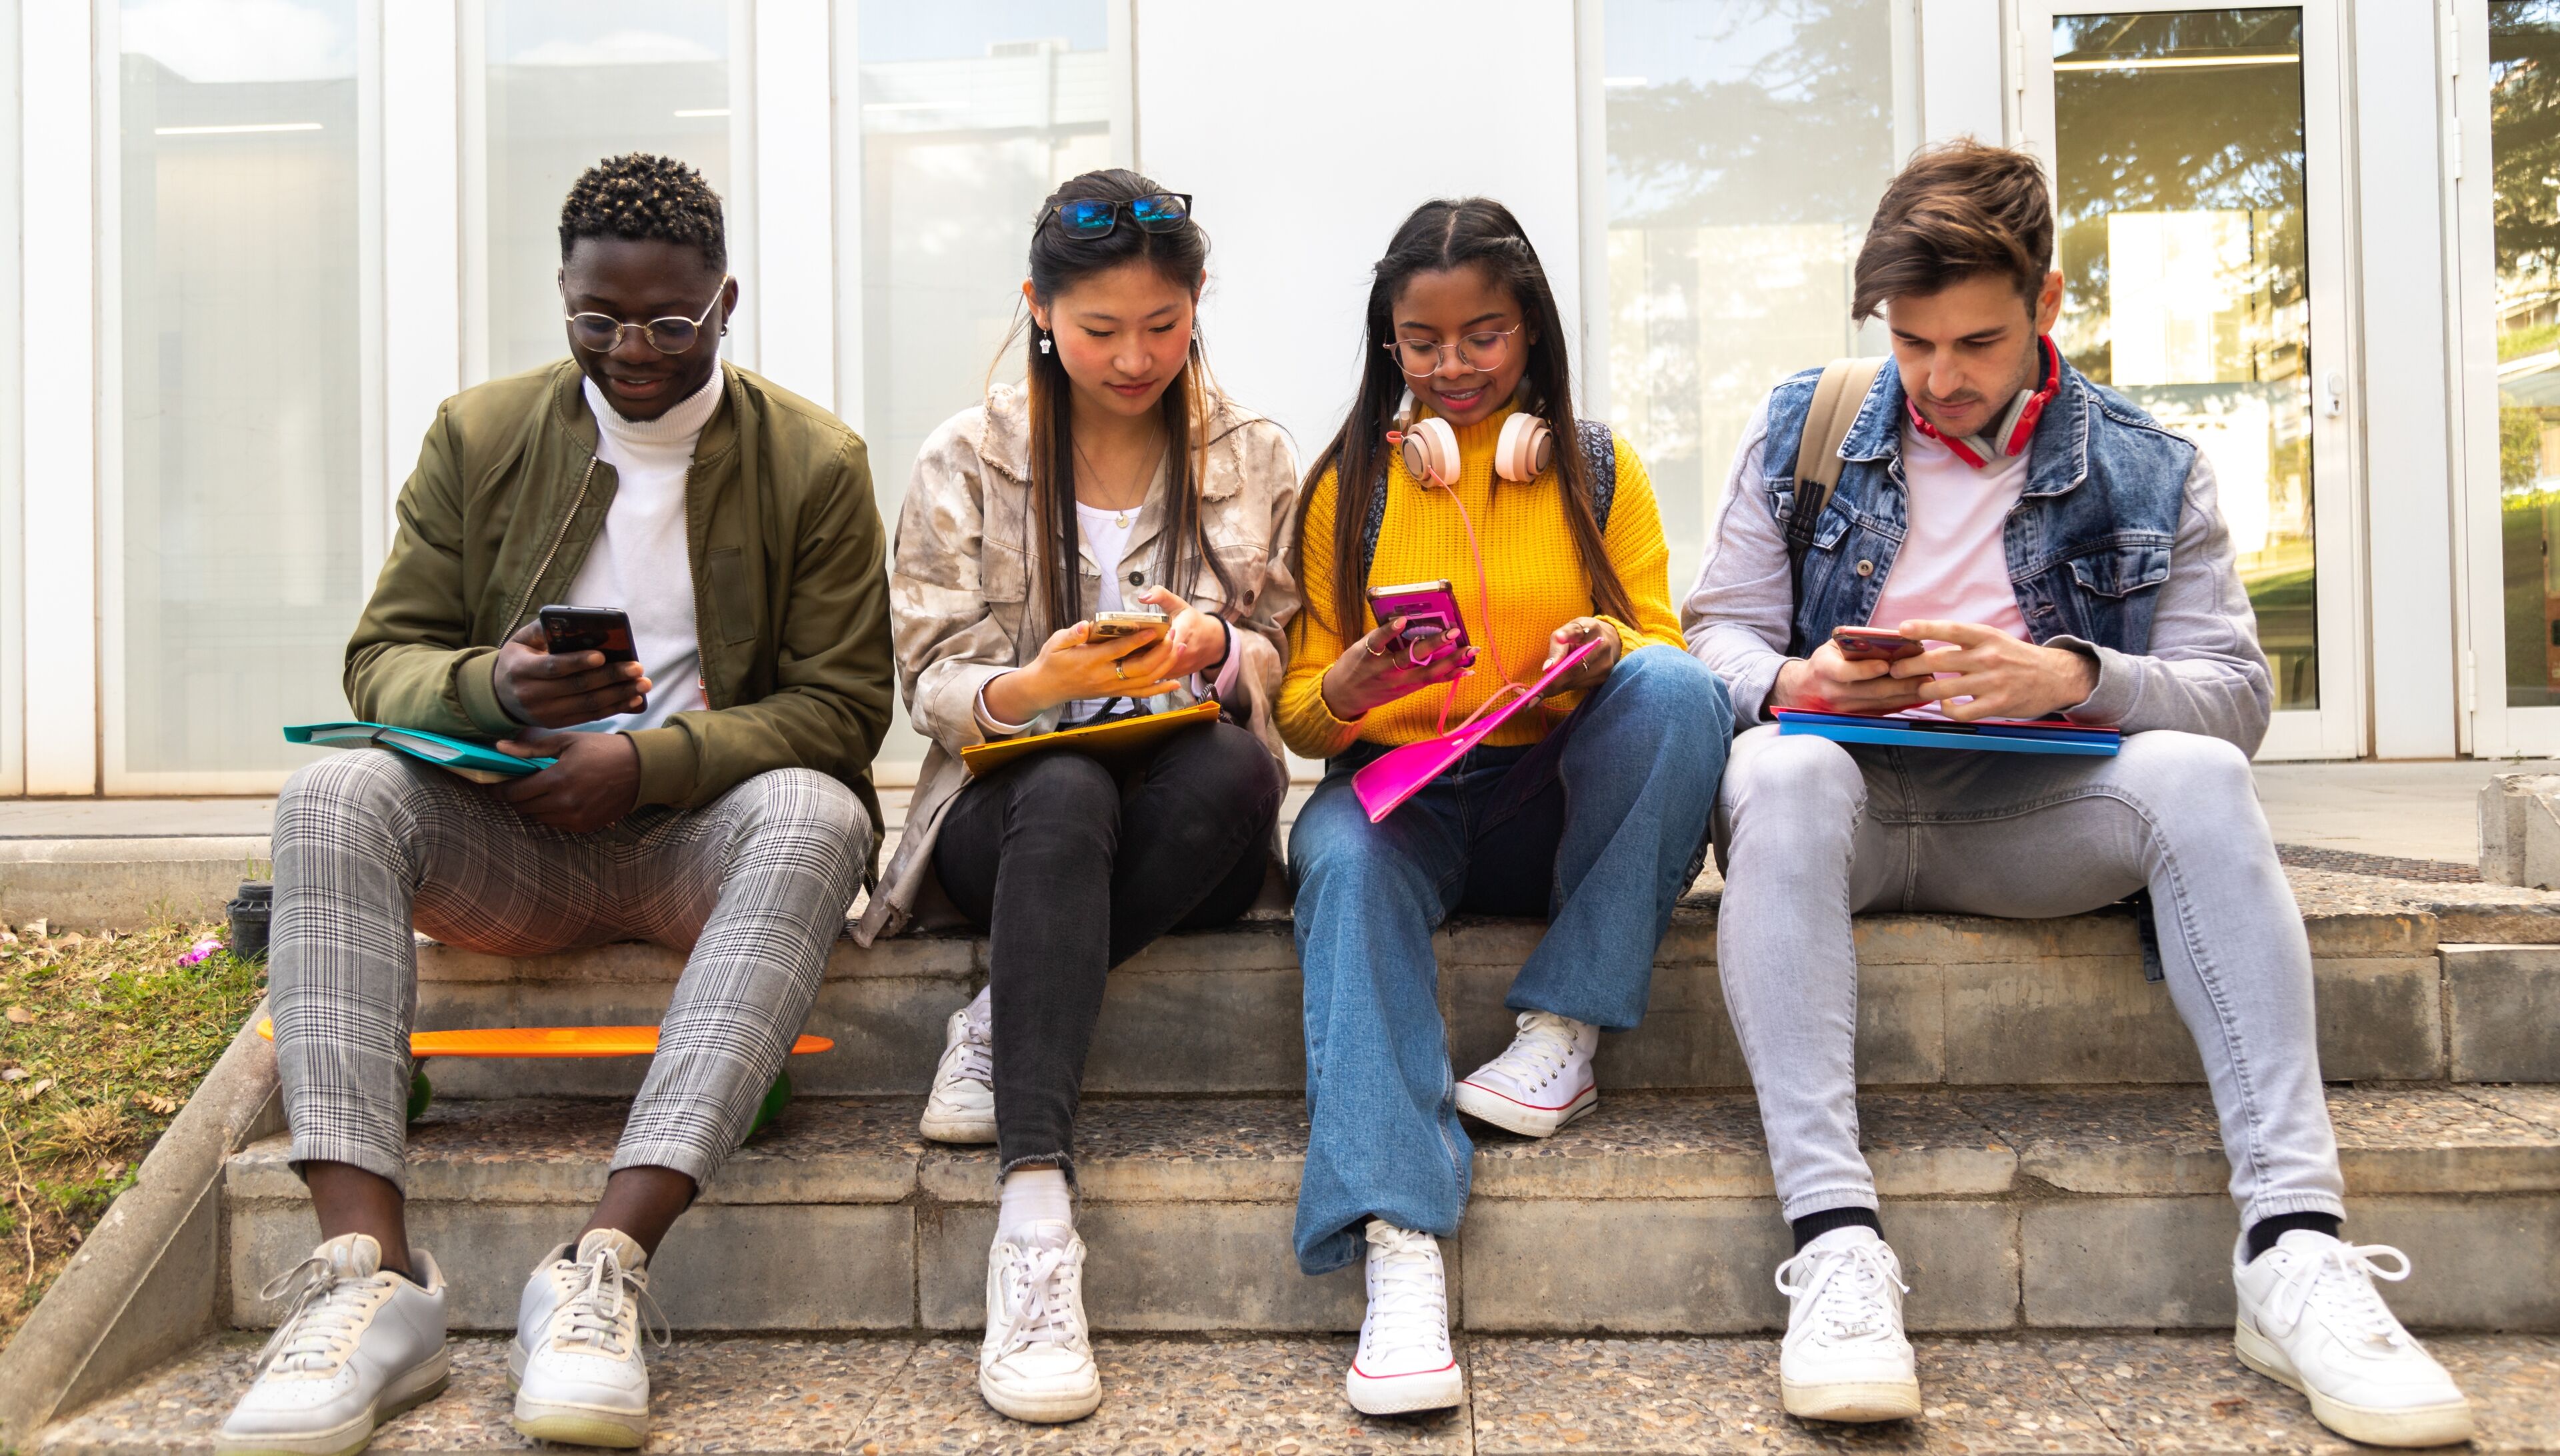 A diverse group of students sitting on steps, each absorbed in their own smartphone, depicting modern campus life.